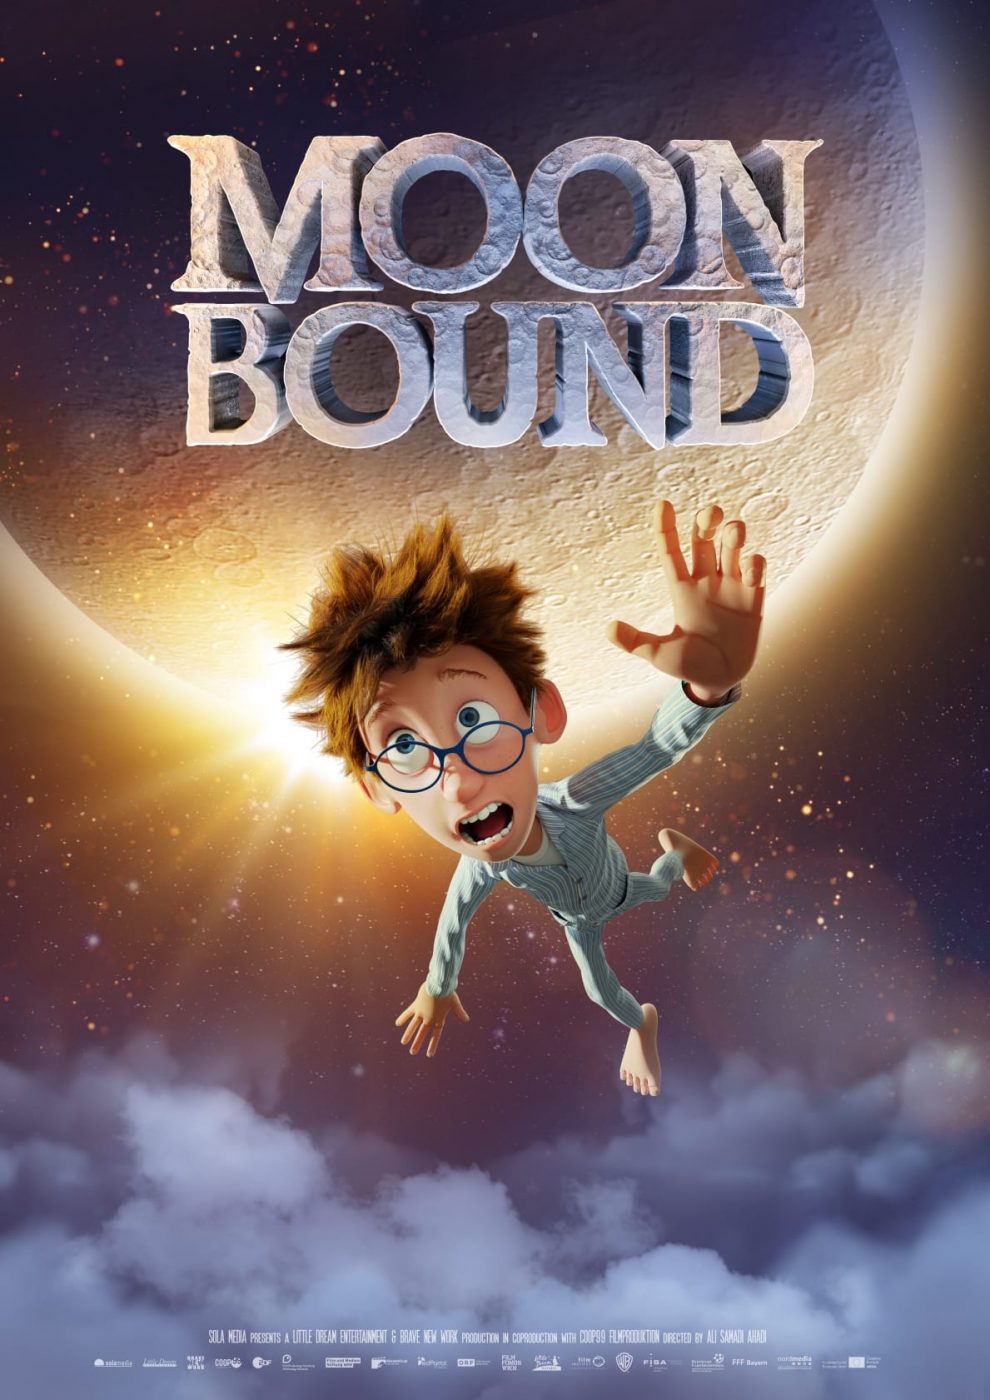 Poster for the movie "Moonbound"